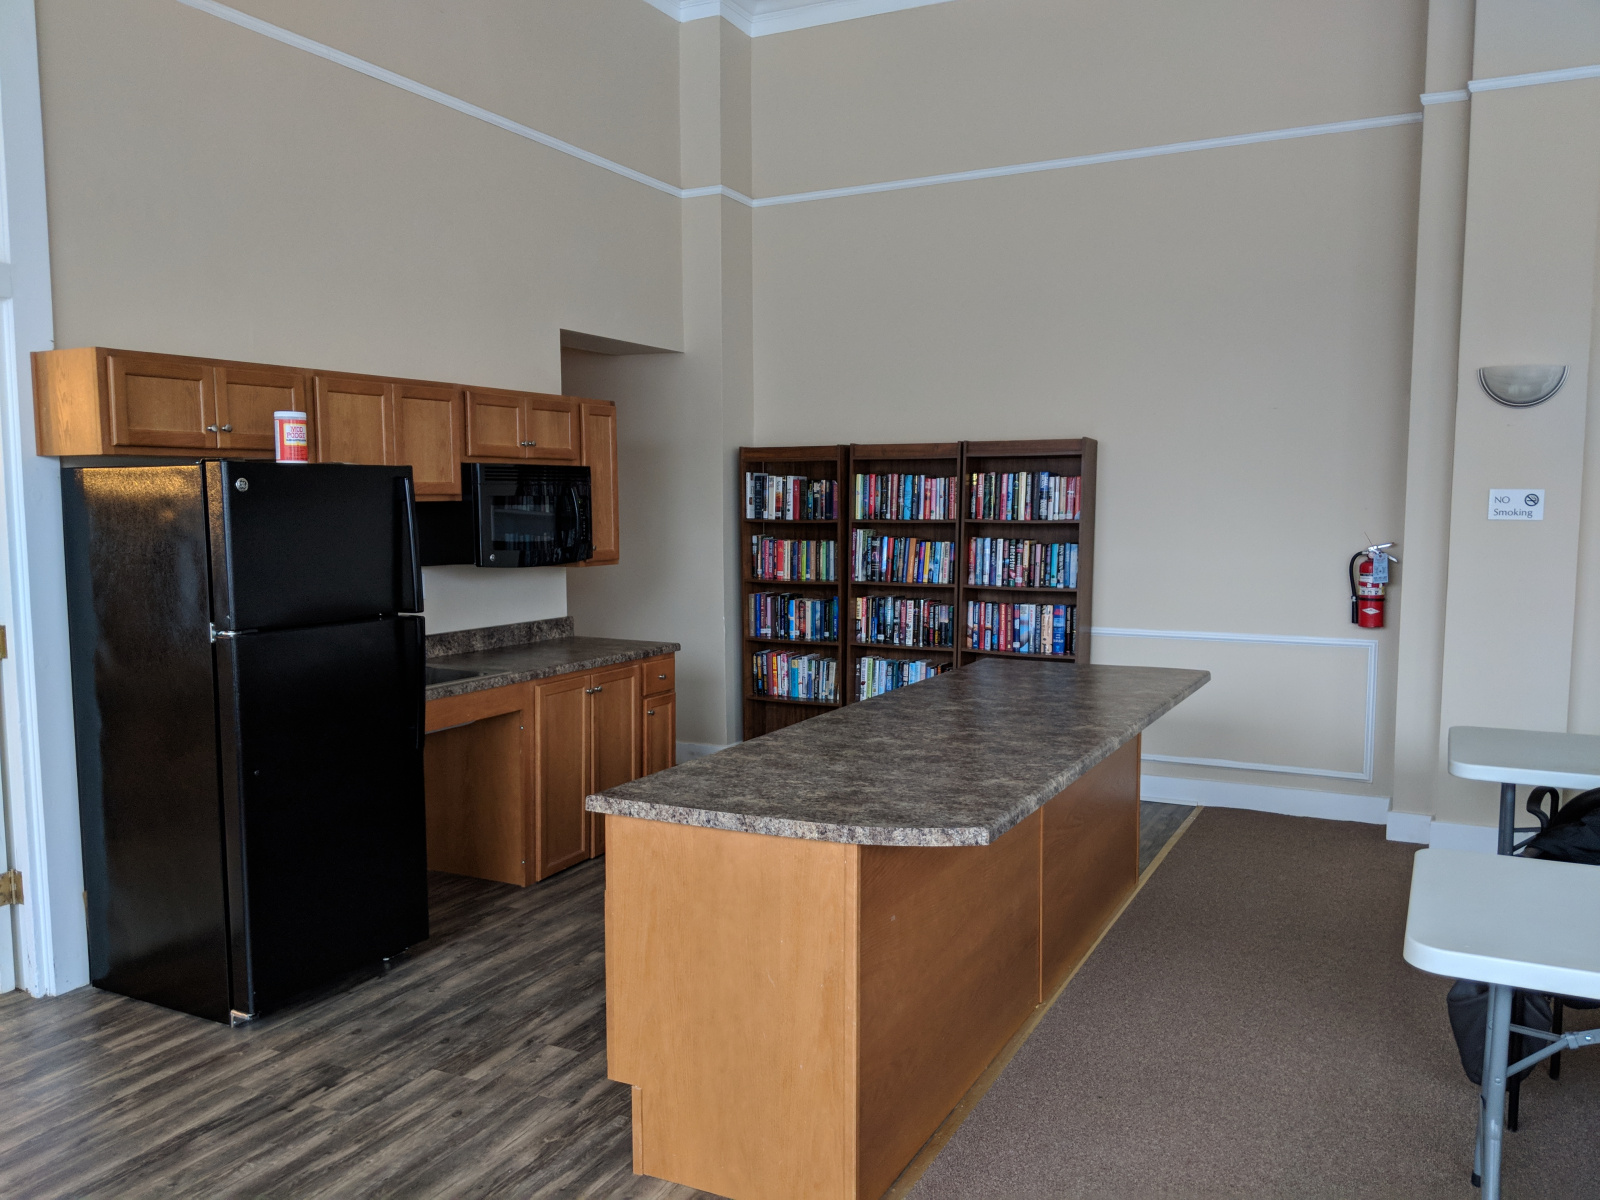 Courthouse-Square-Community-Room-Kitchen